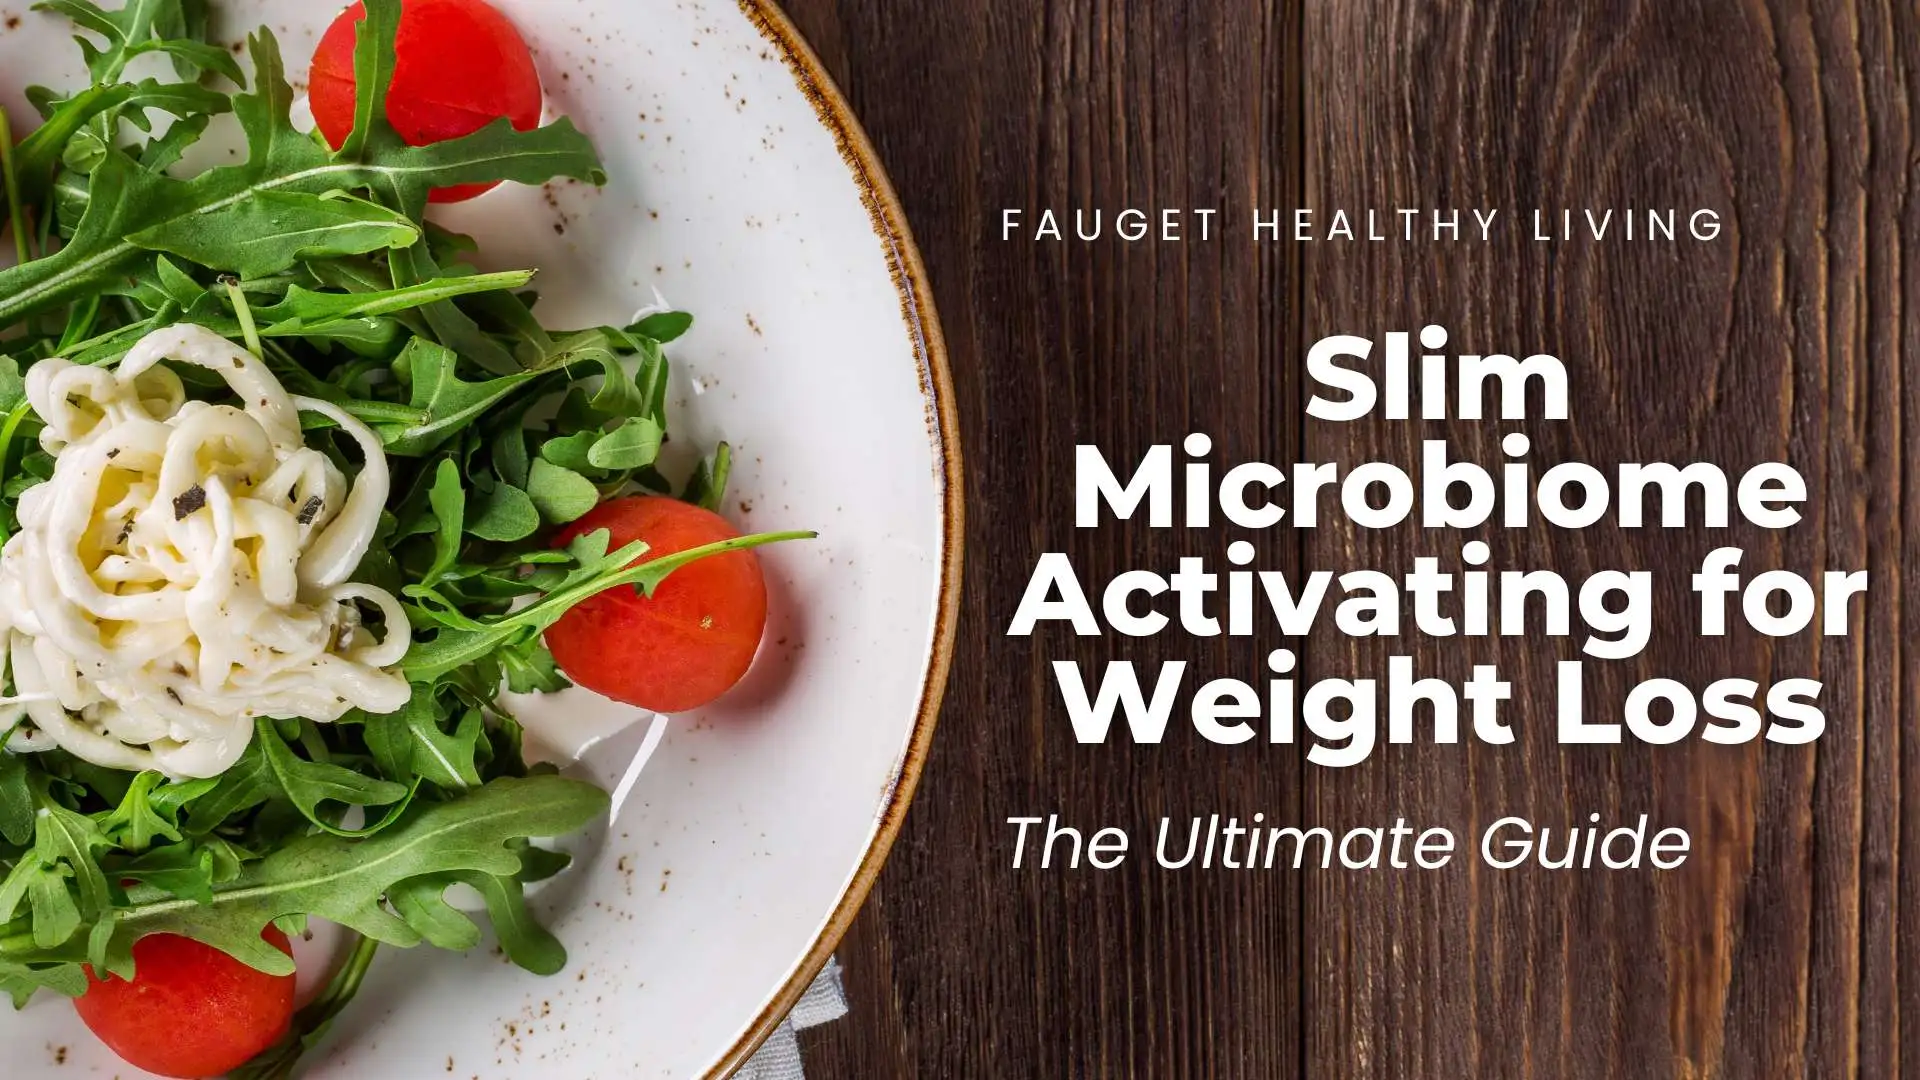 Slim Microbiome Activating for Weight Loss